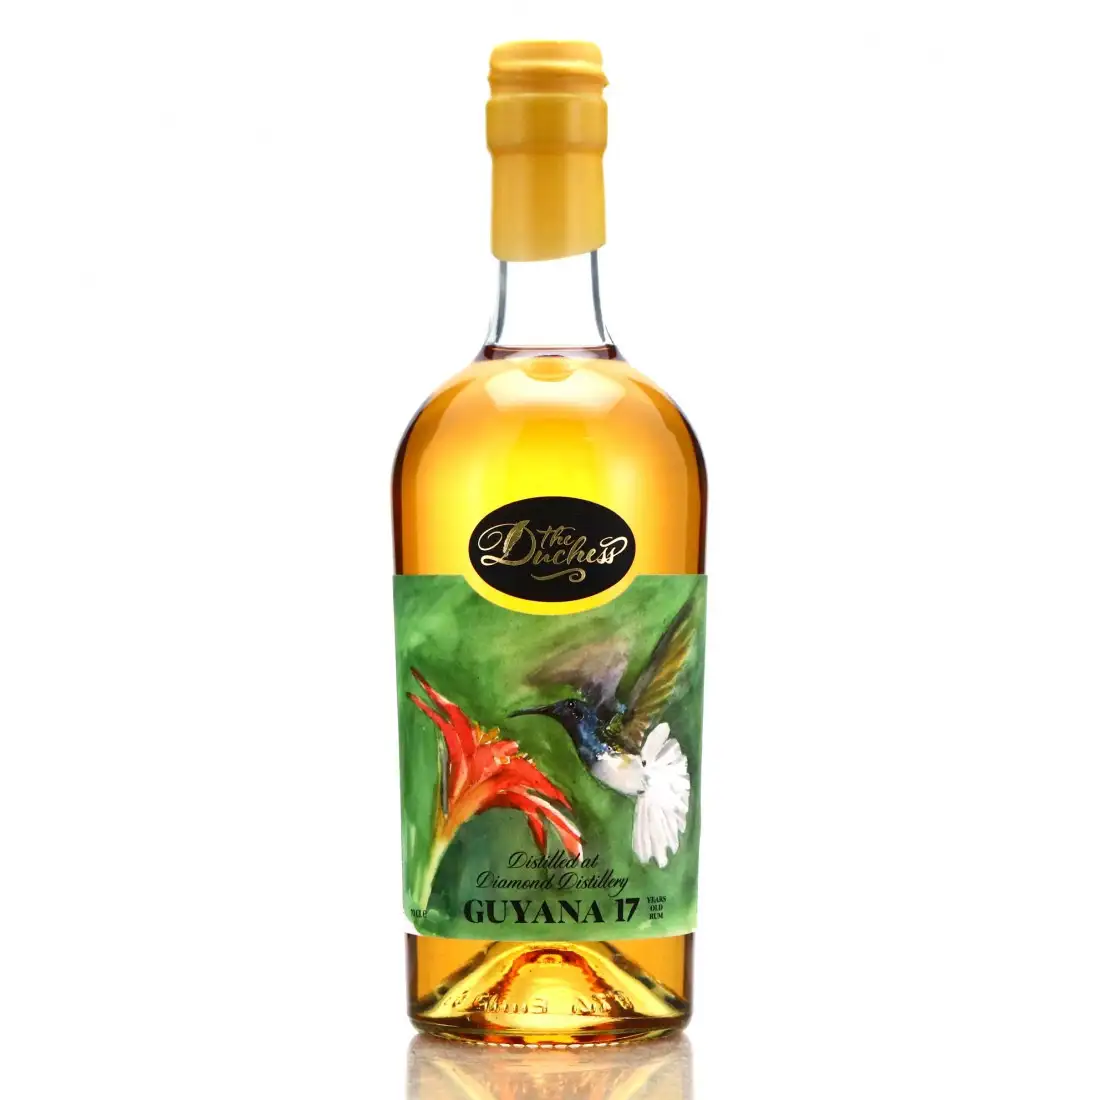 Image of the front of the bottle of the rum Guyana 17